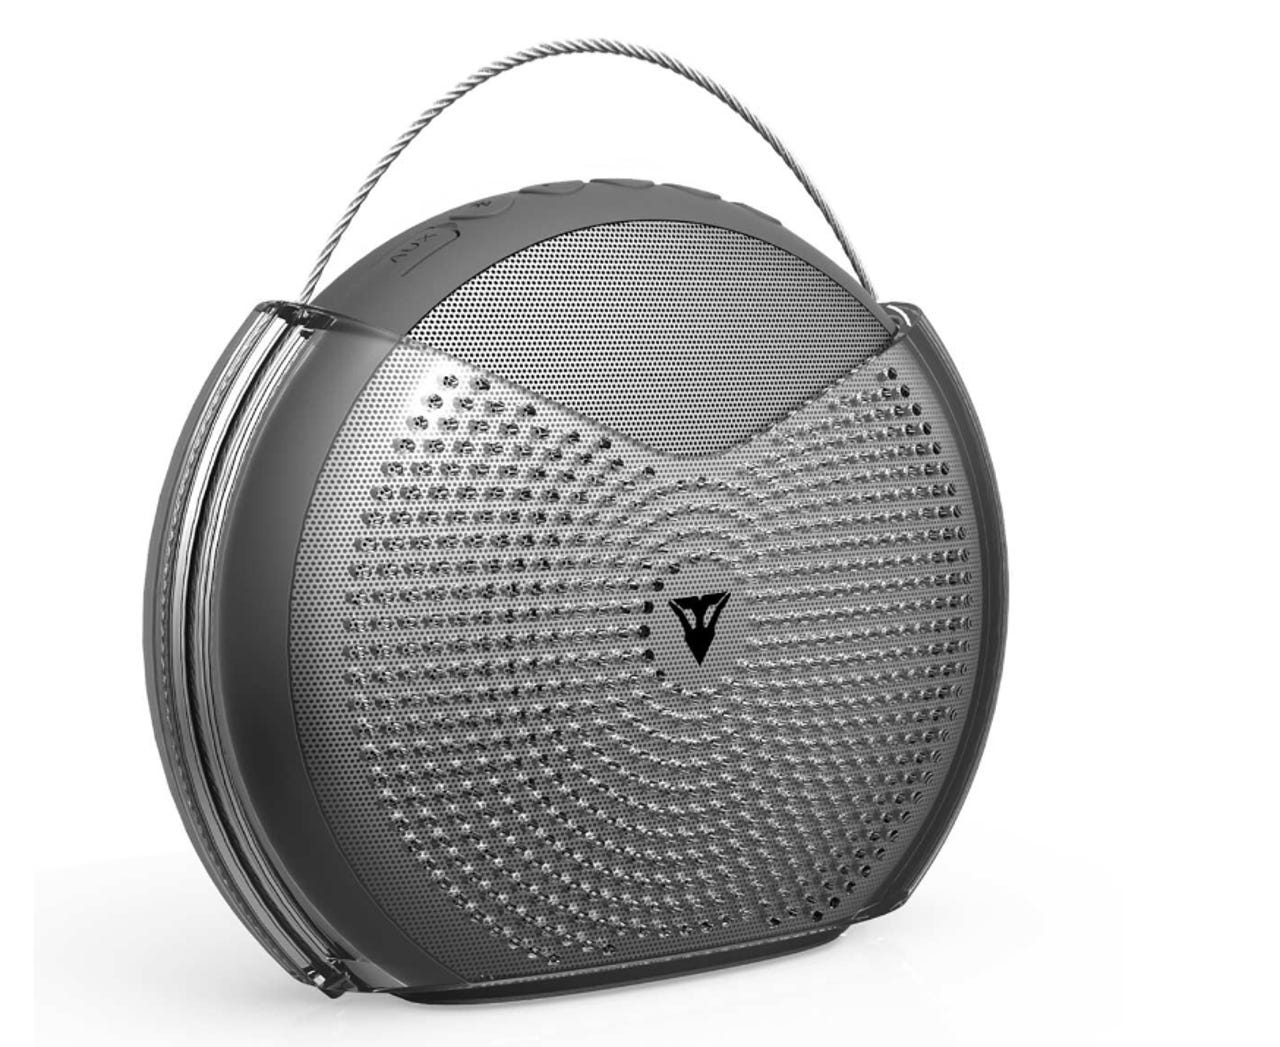 New Bluetooth speakers worth a look ZDNet